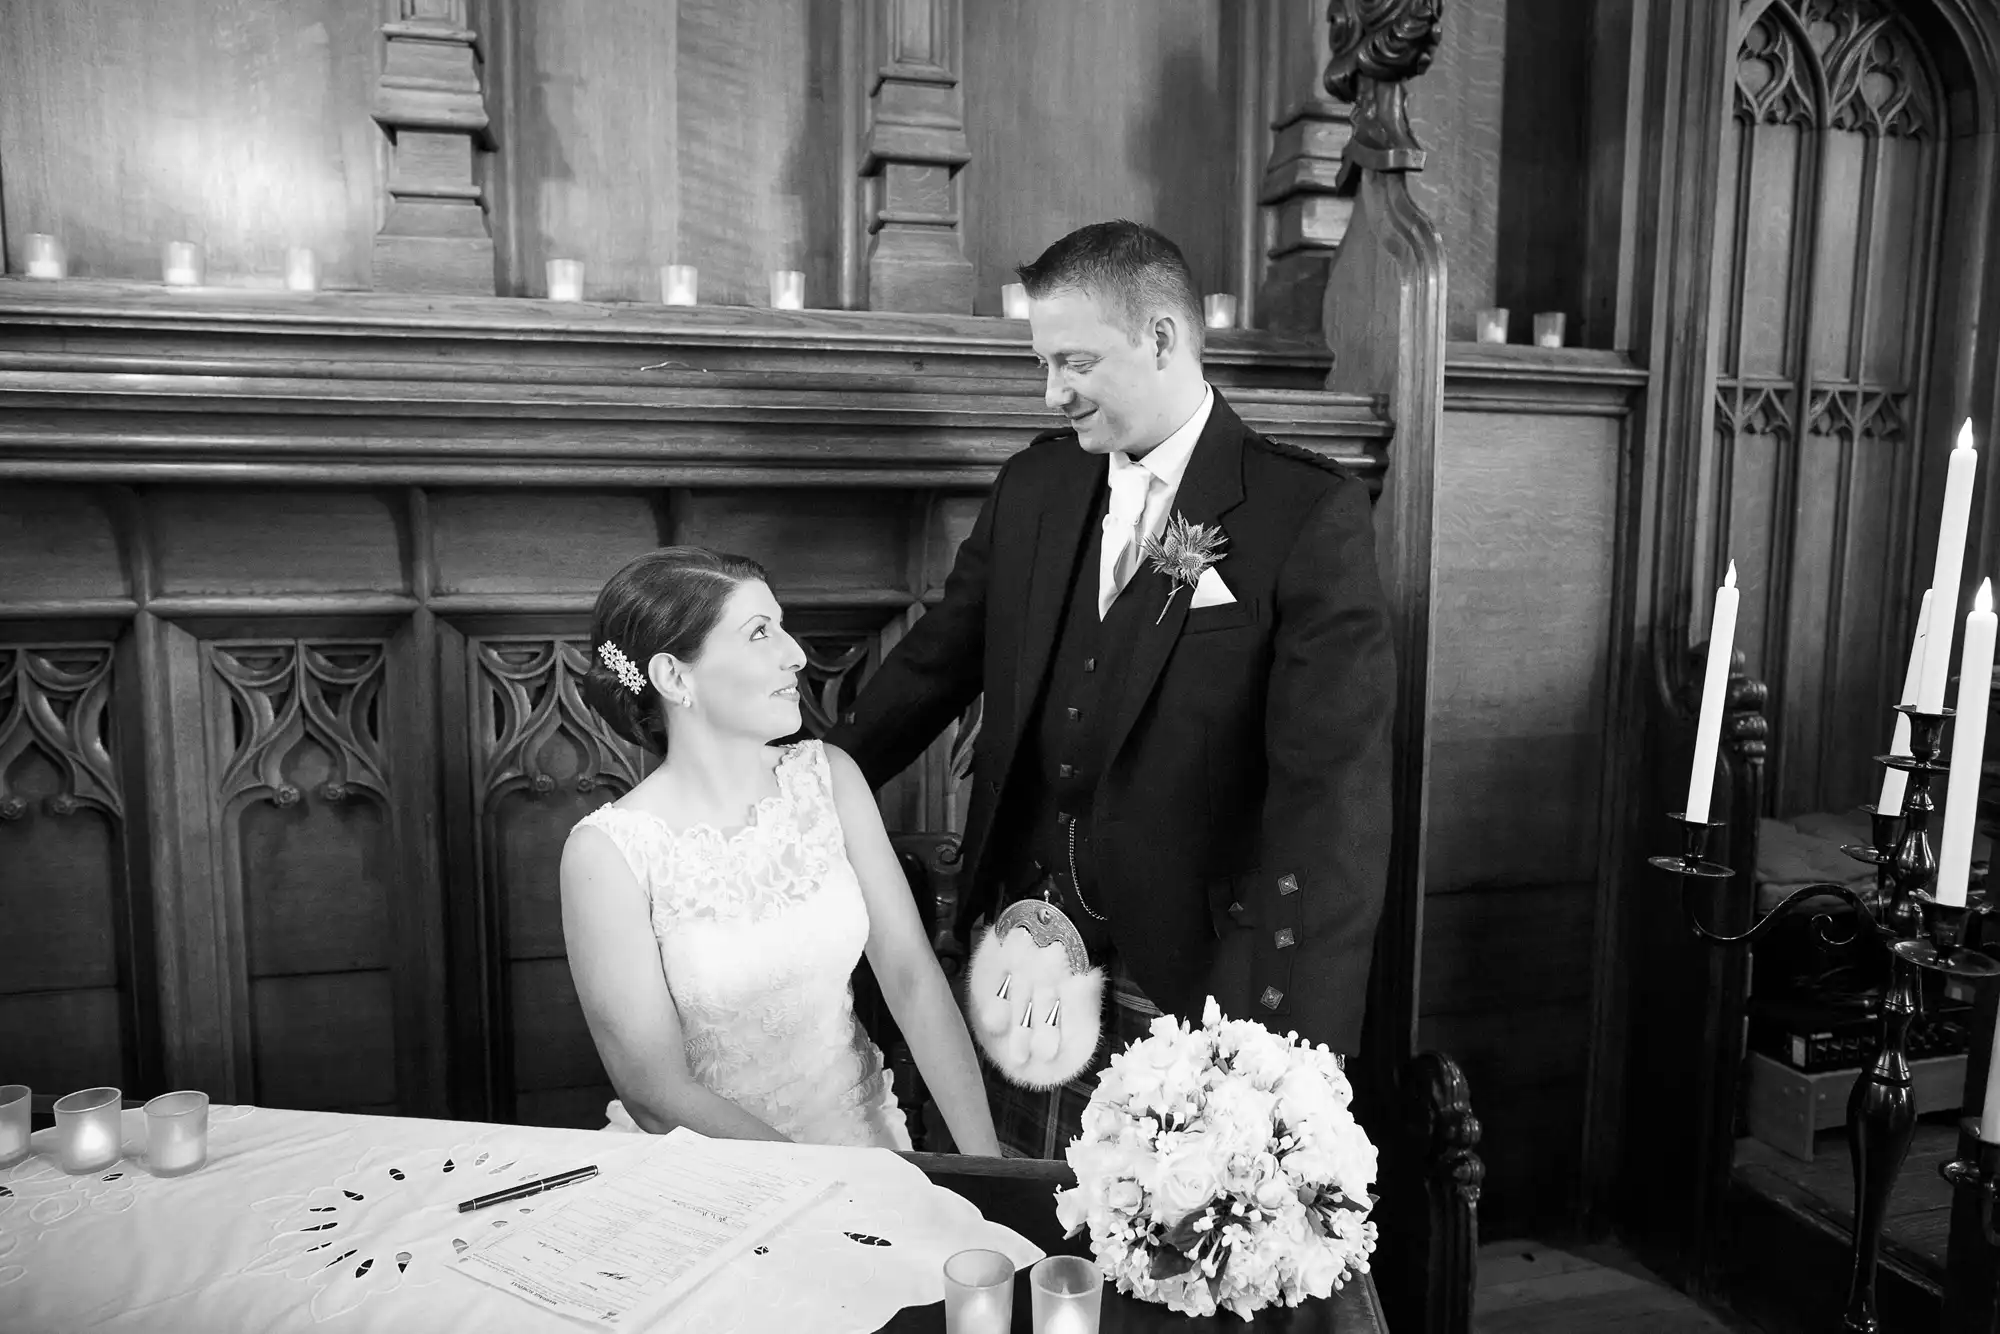 A bride and groom smiling at each other at the signing table inside a church, black and white photo.